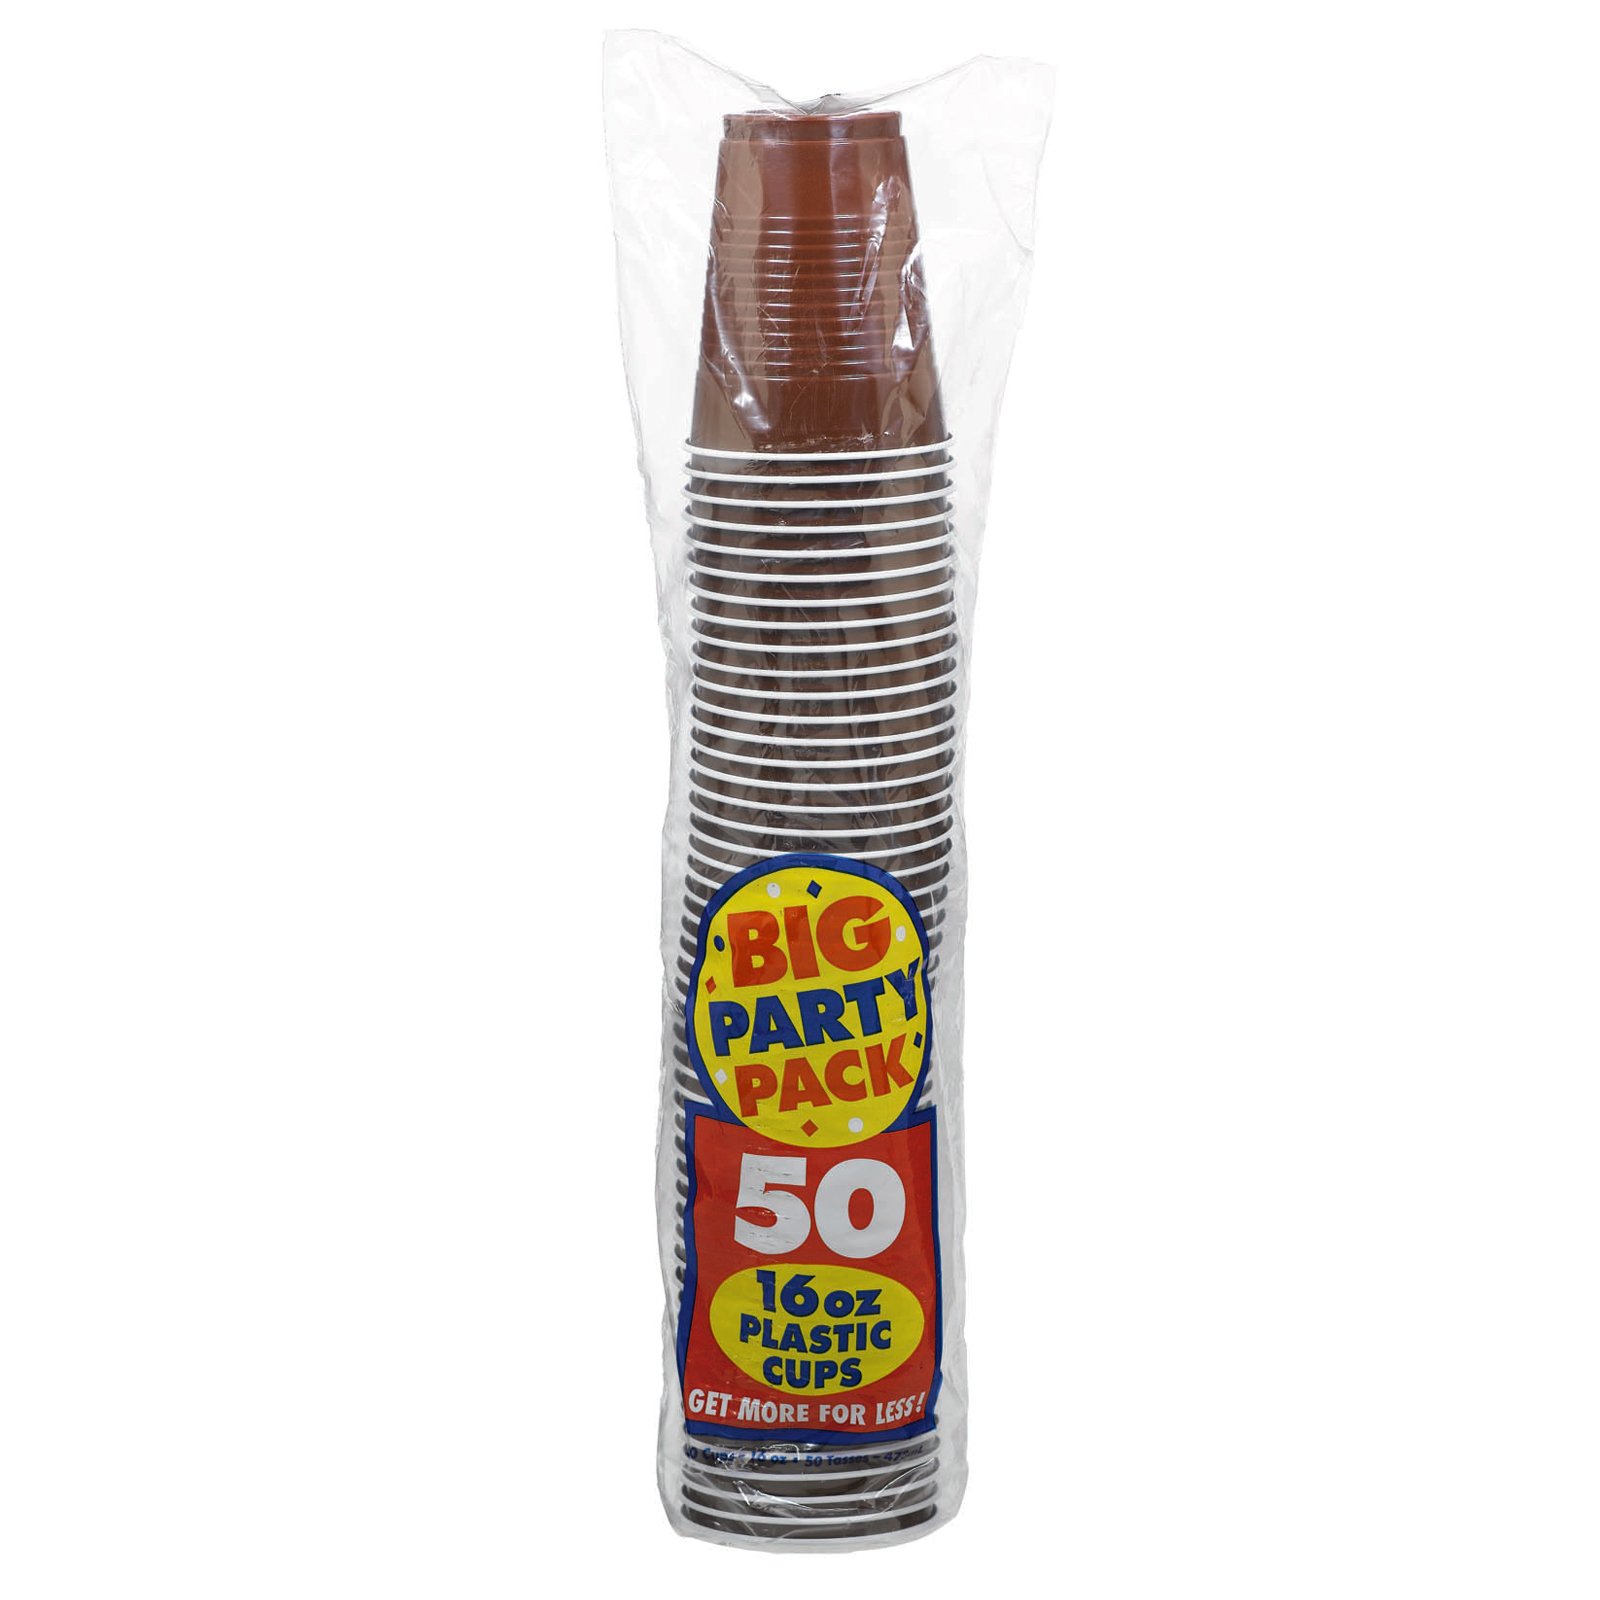 Chocolate Brown Big Party Pack - 16 oz. Plastic Cups (50 count)